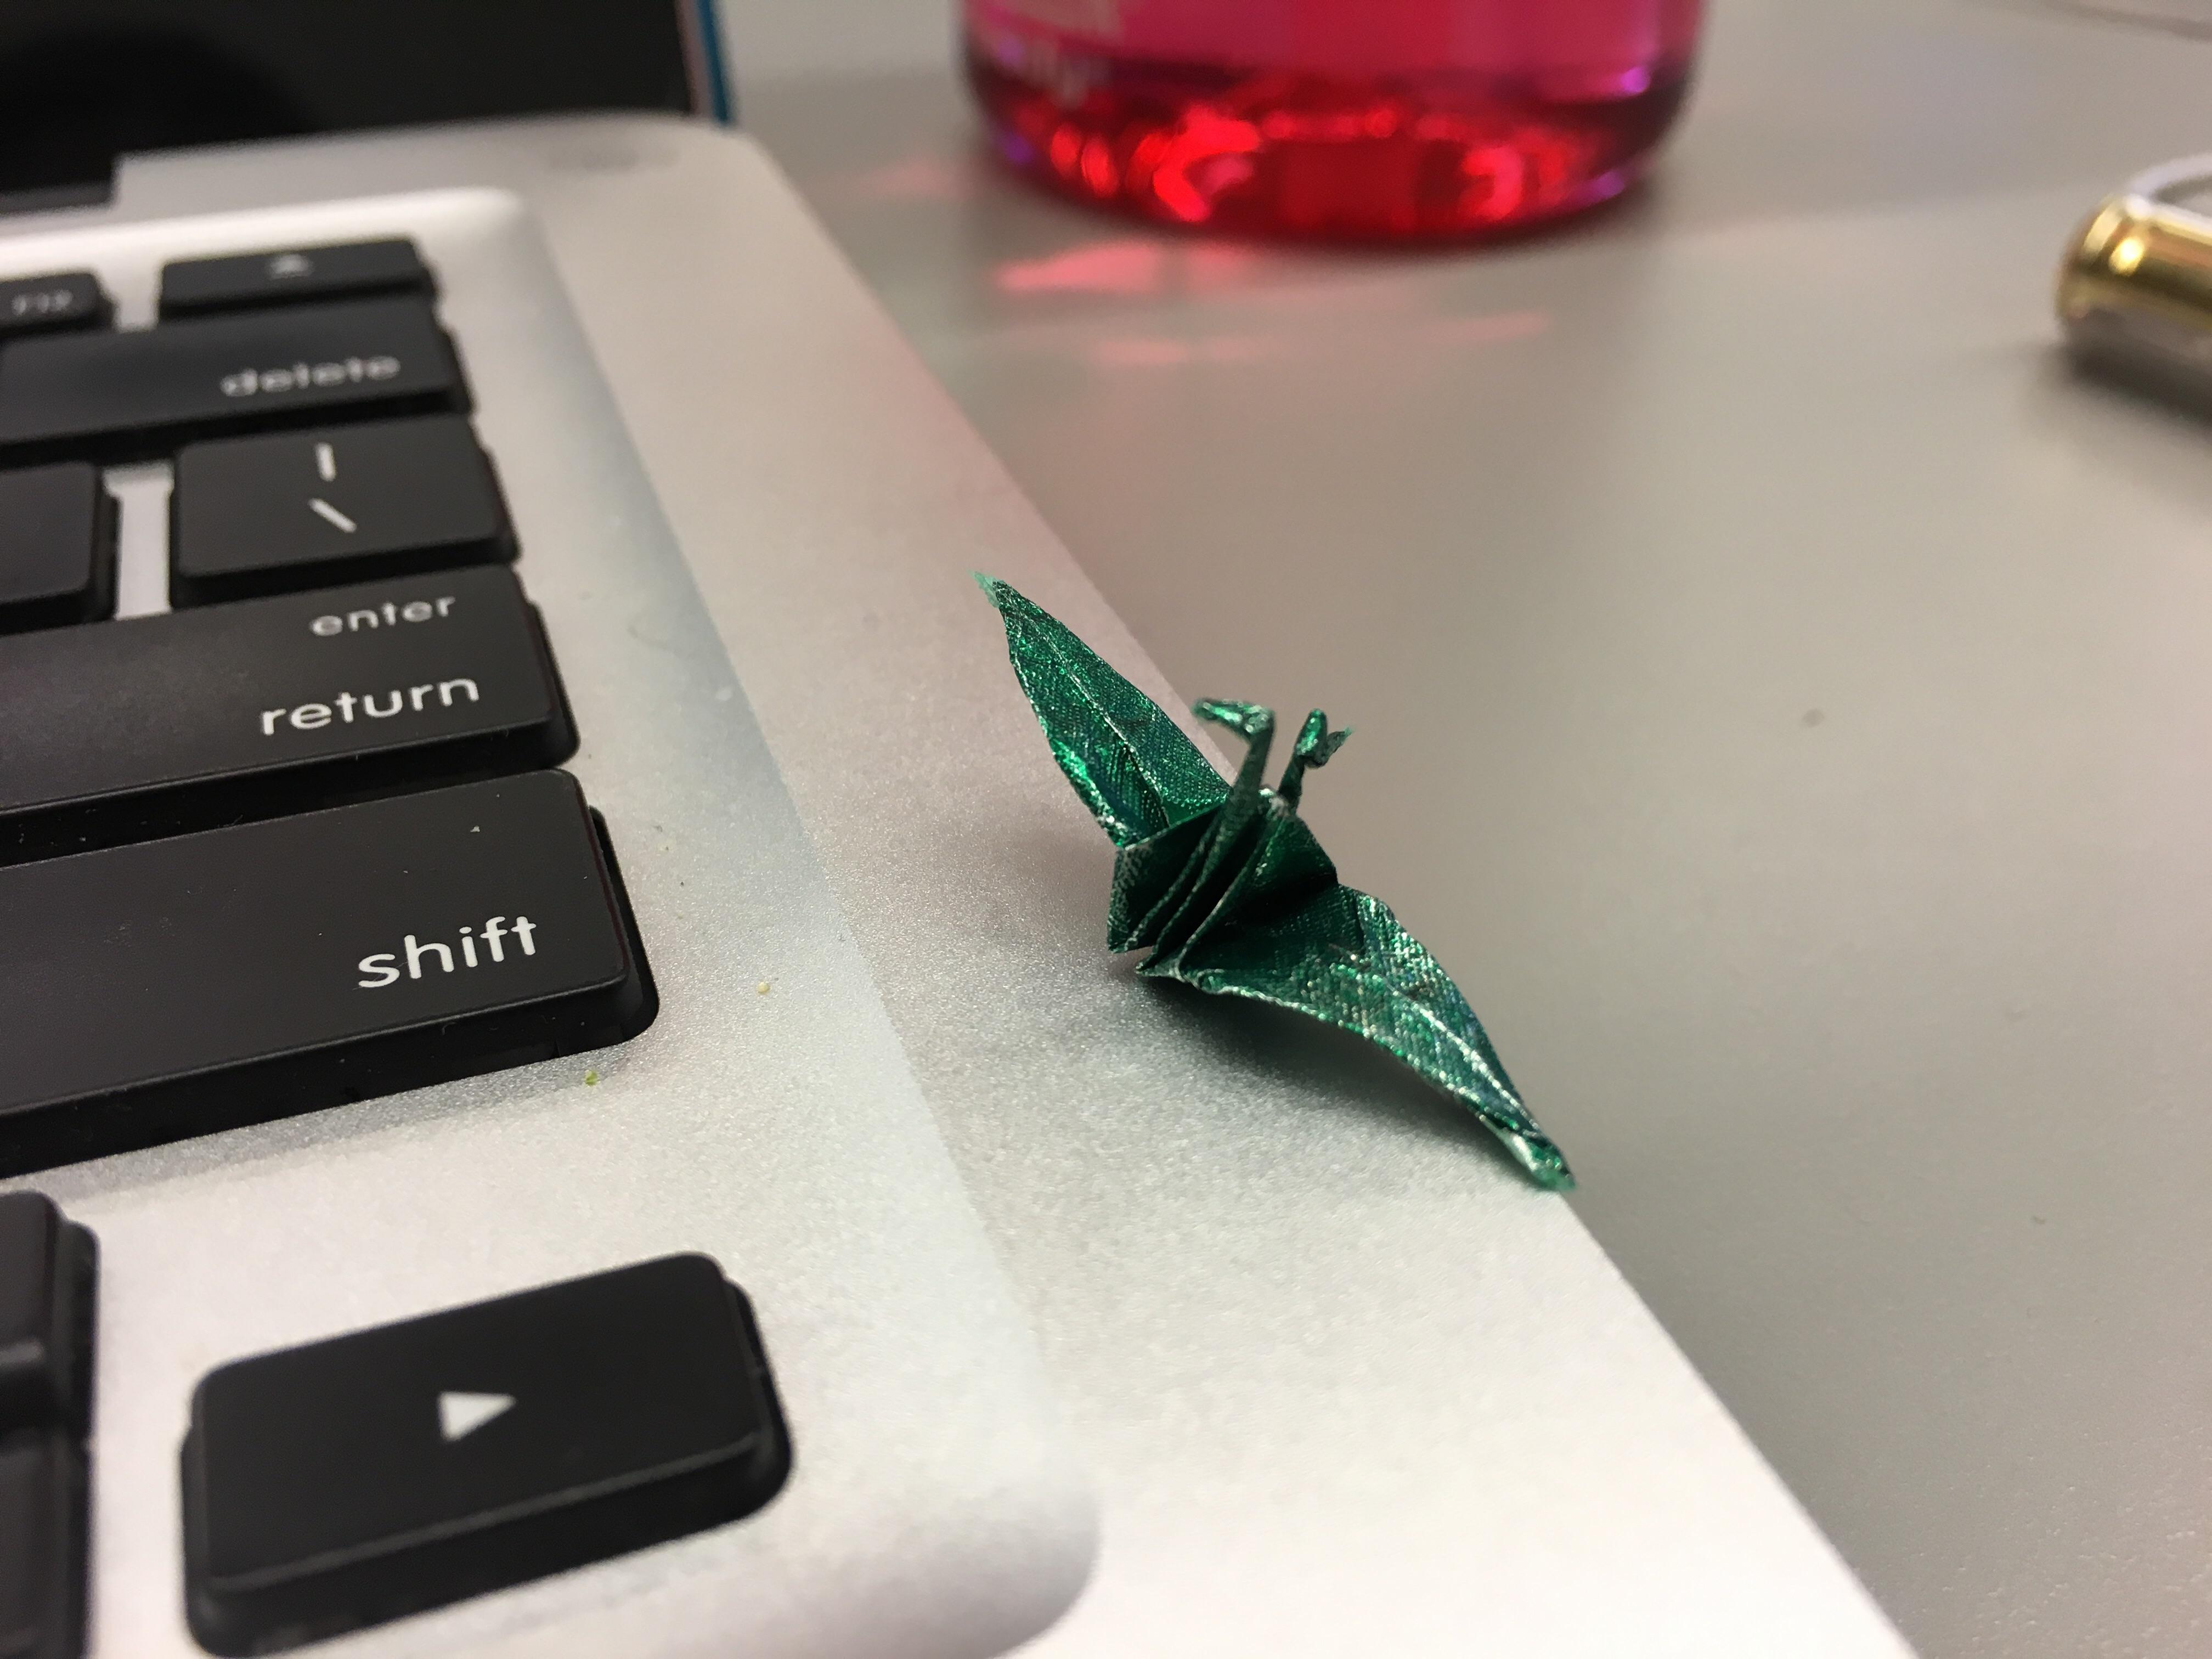 Gum Wrapper Origami Crane I Gave My Classmate Gum And He Gave Me This Perfect Tiny Gum Wrapper